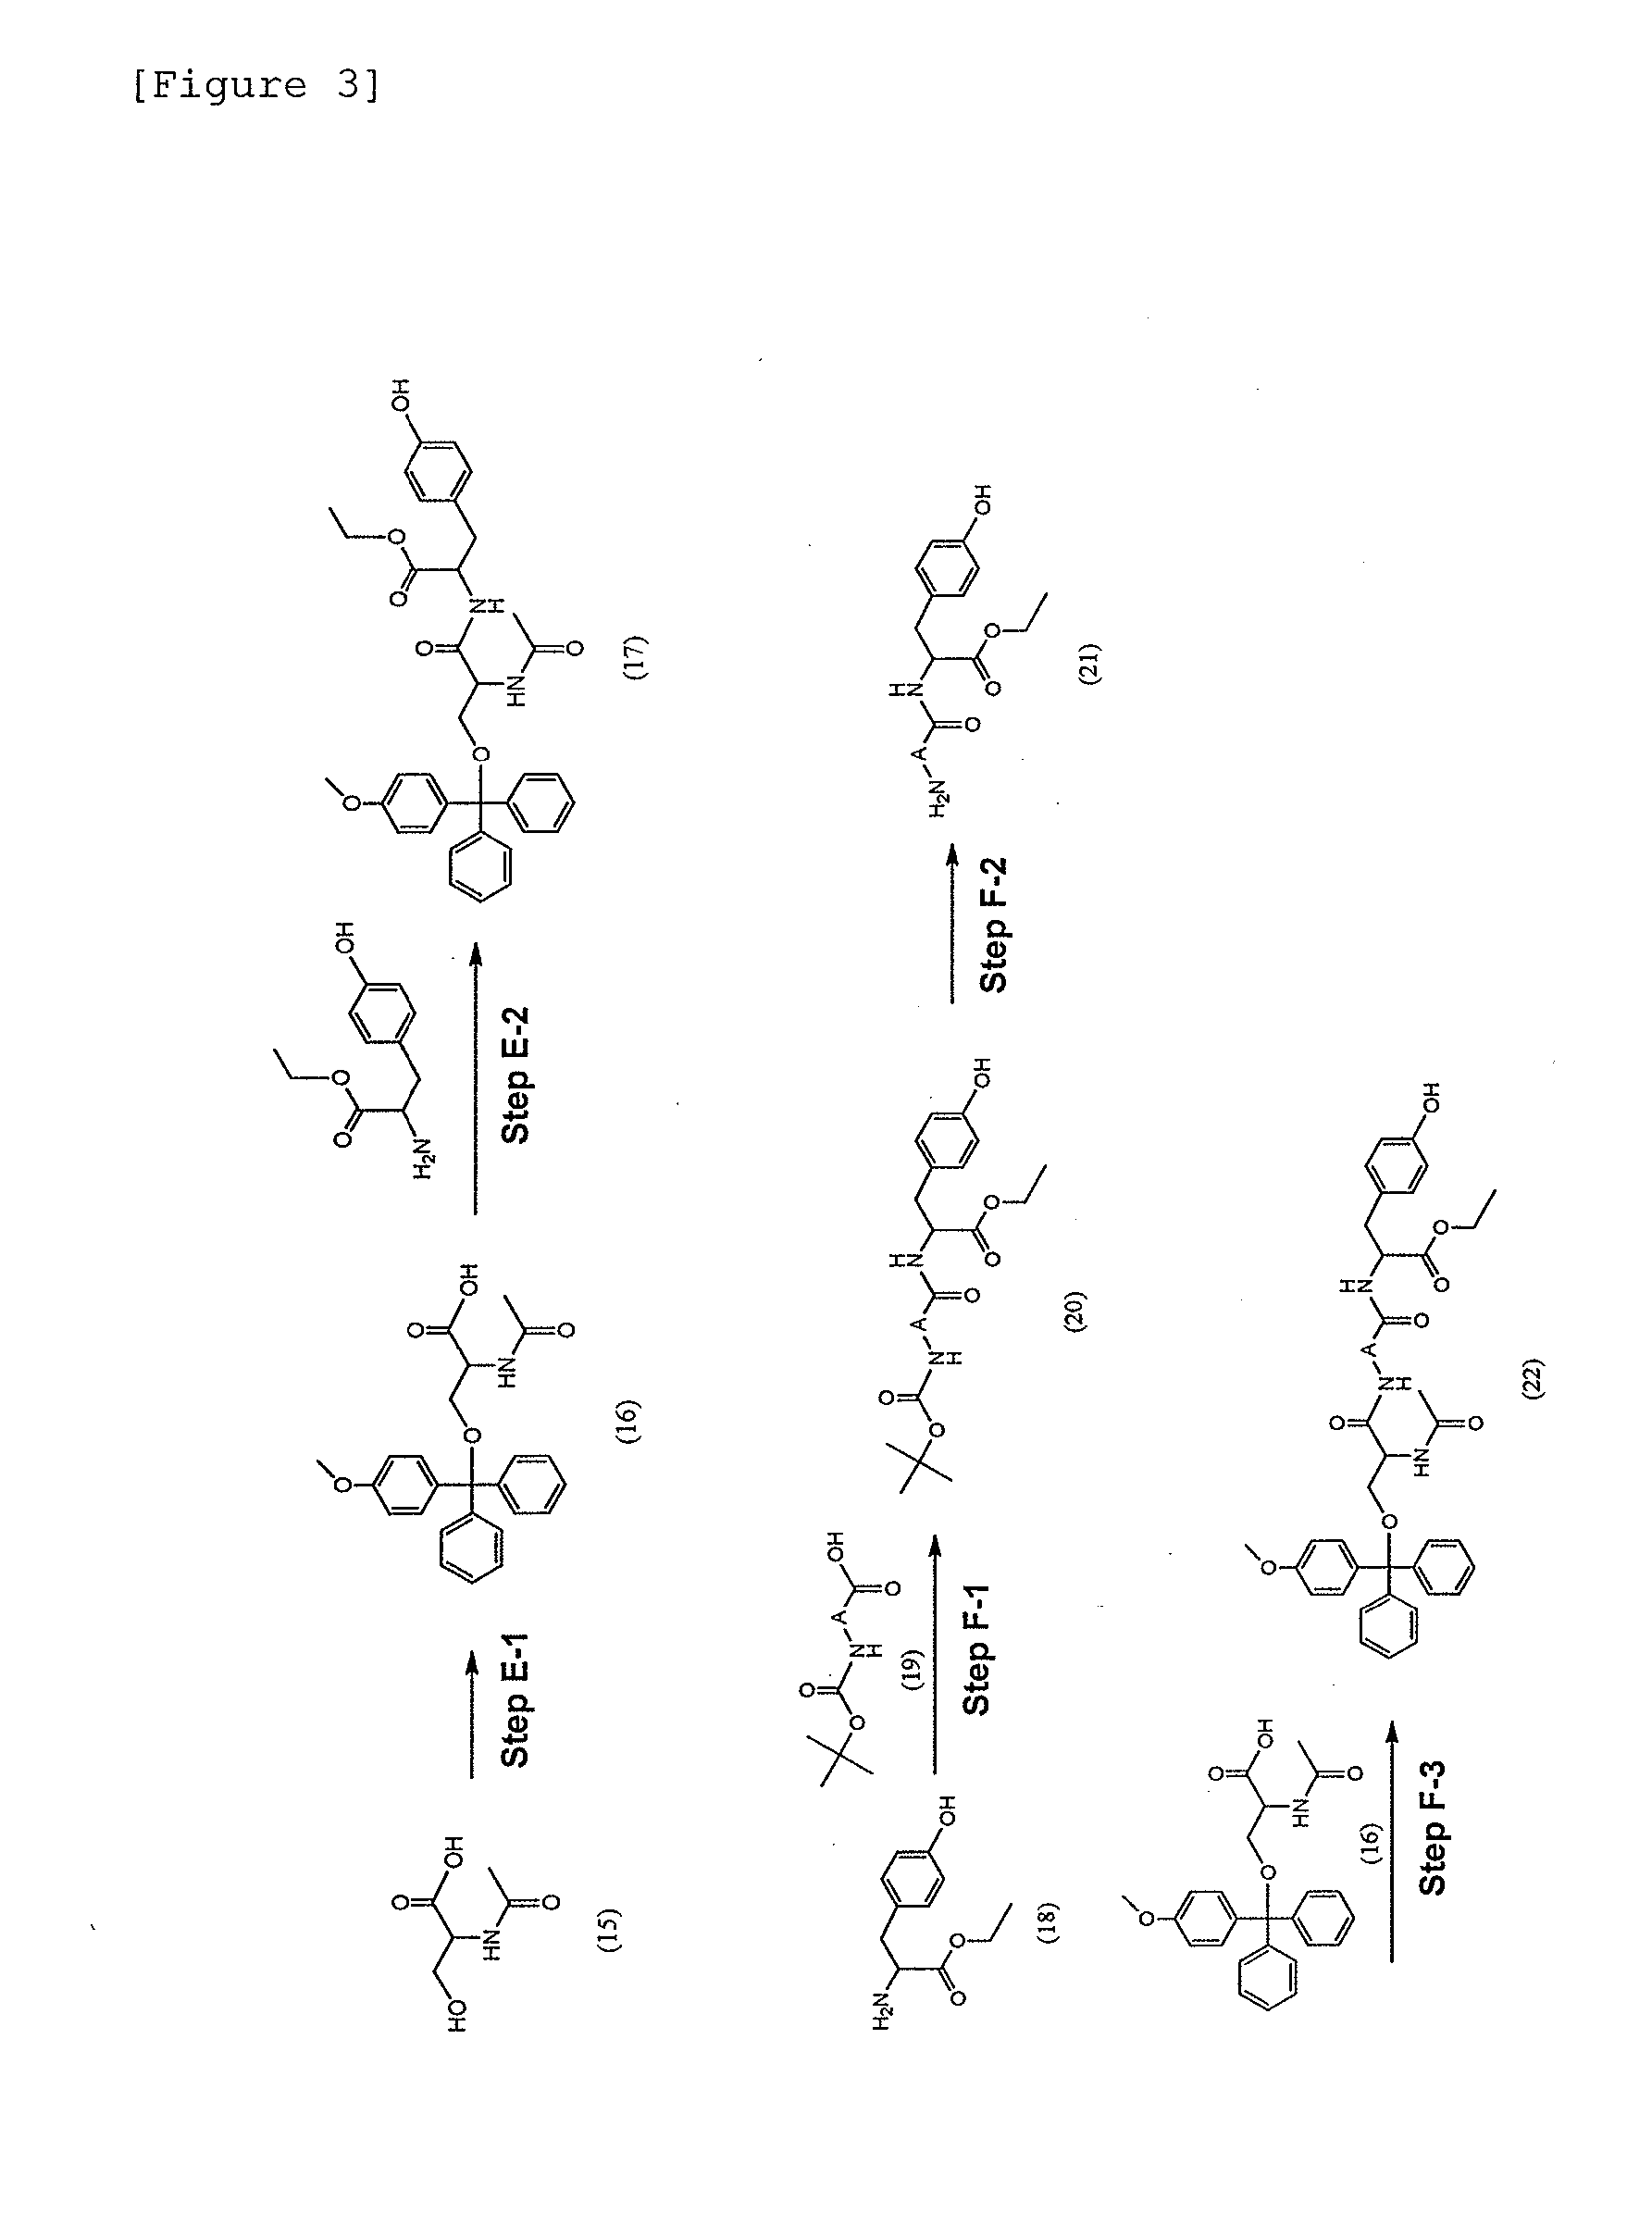 Modified Single-Stranded Polynucleotide